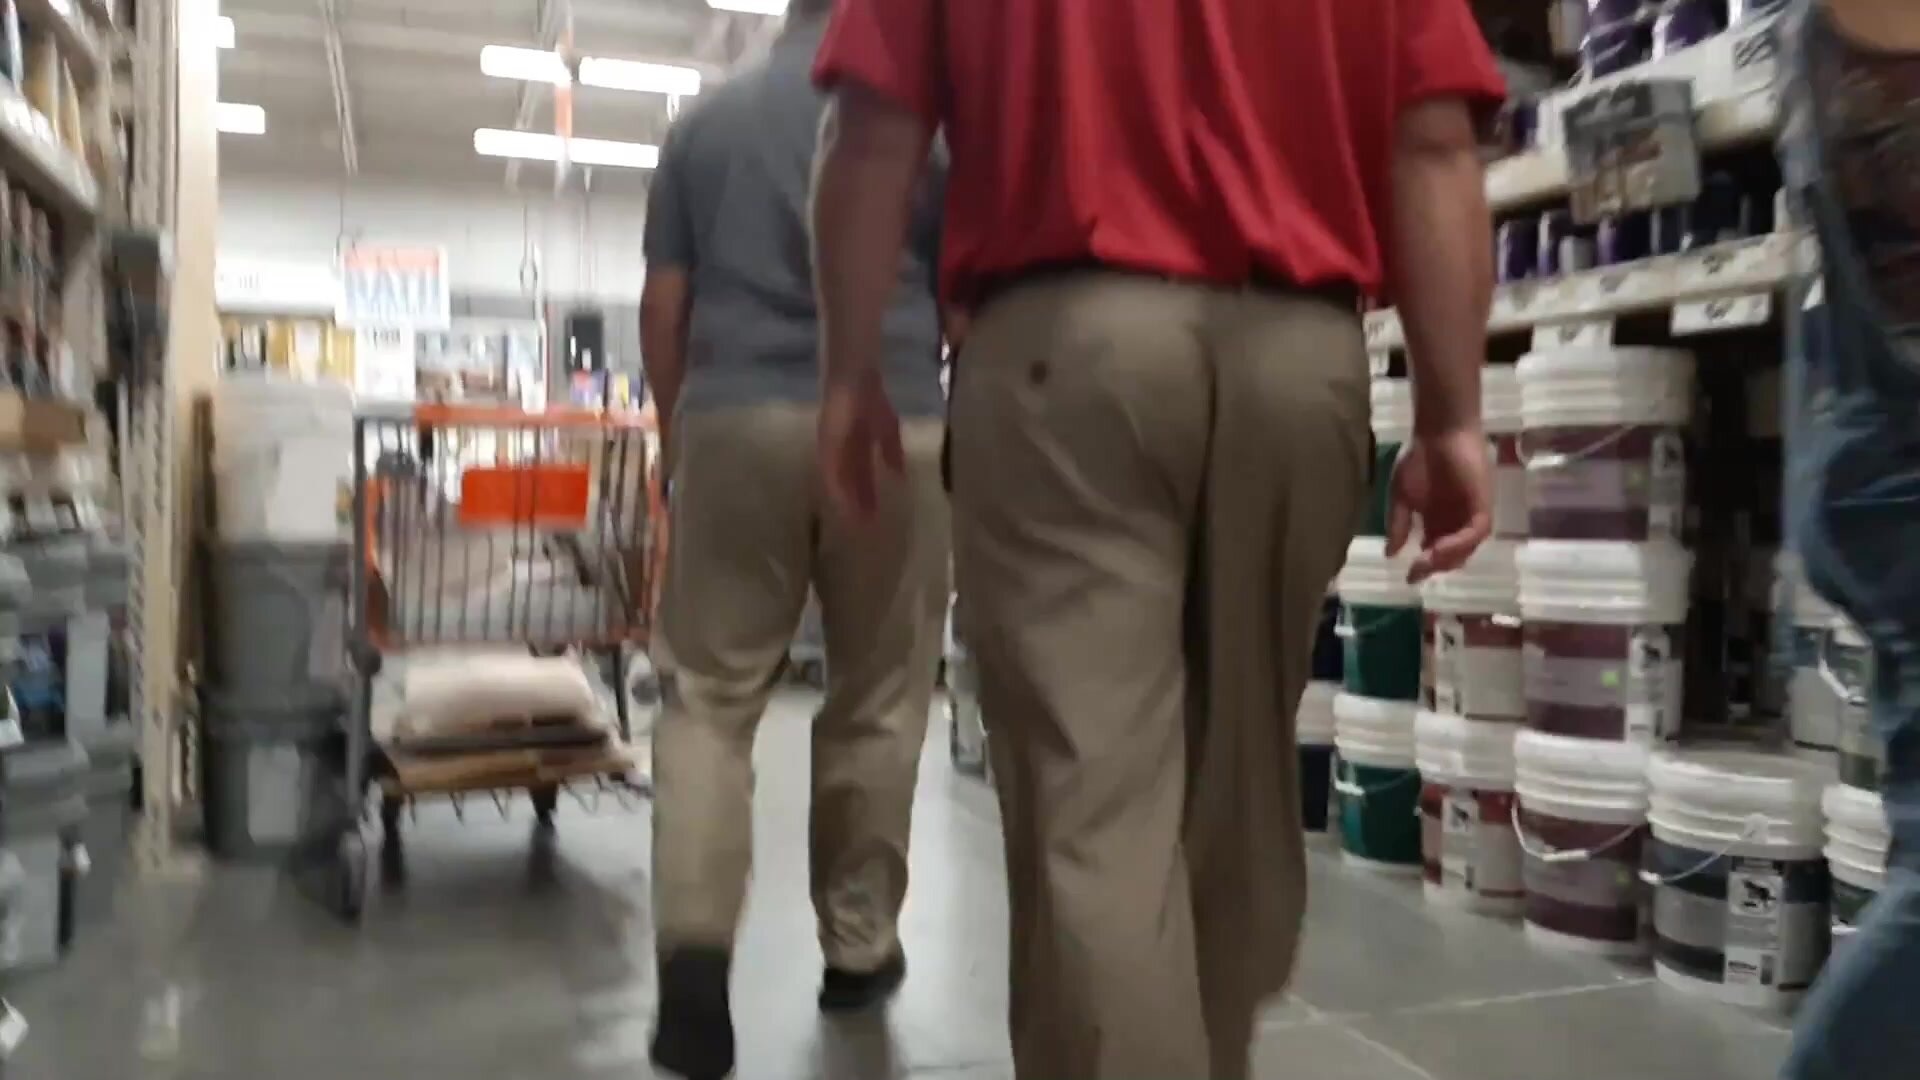 2 Hot Business Daddies Wandering the Store